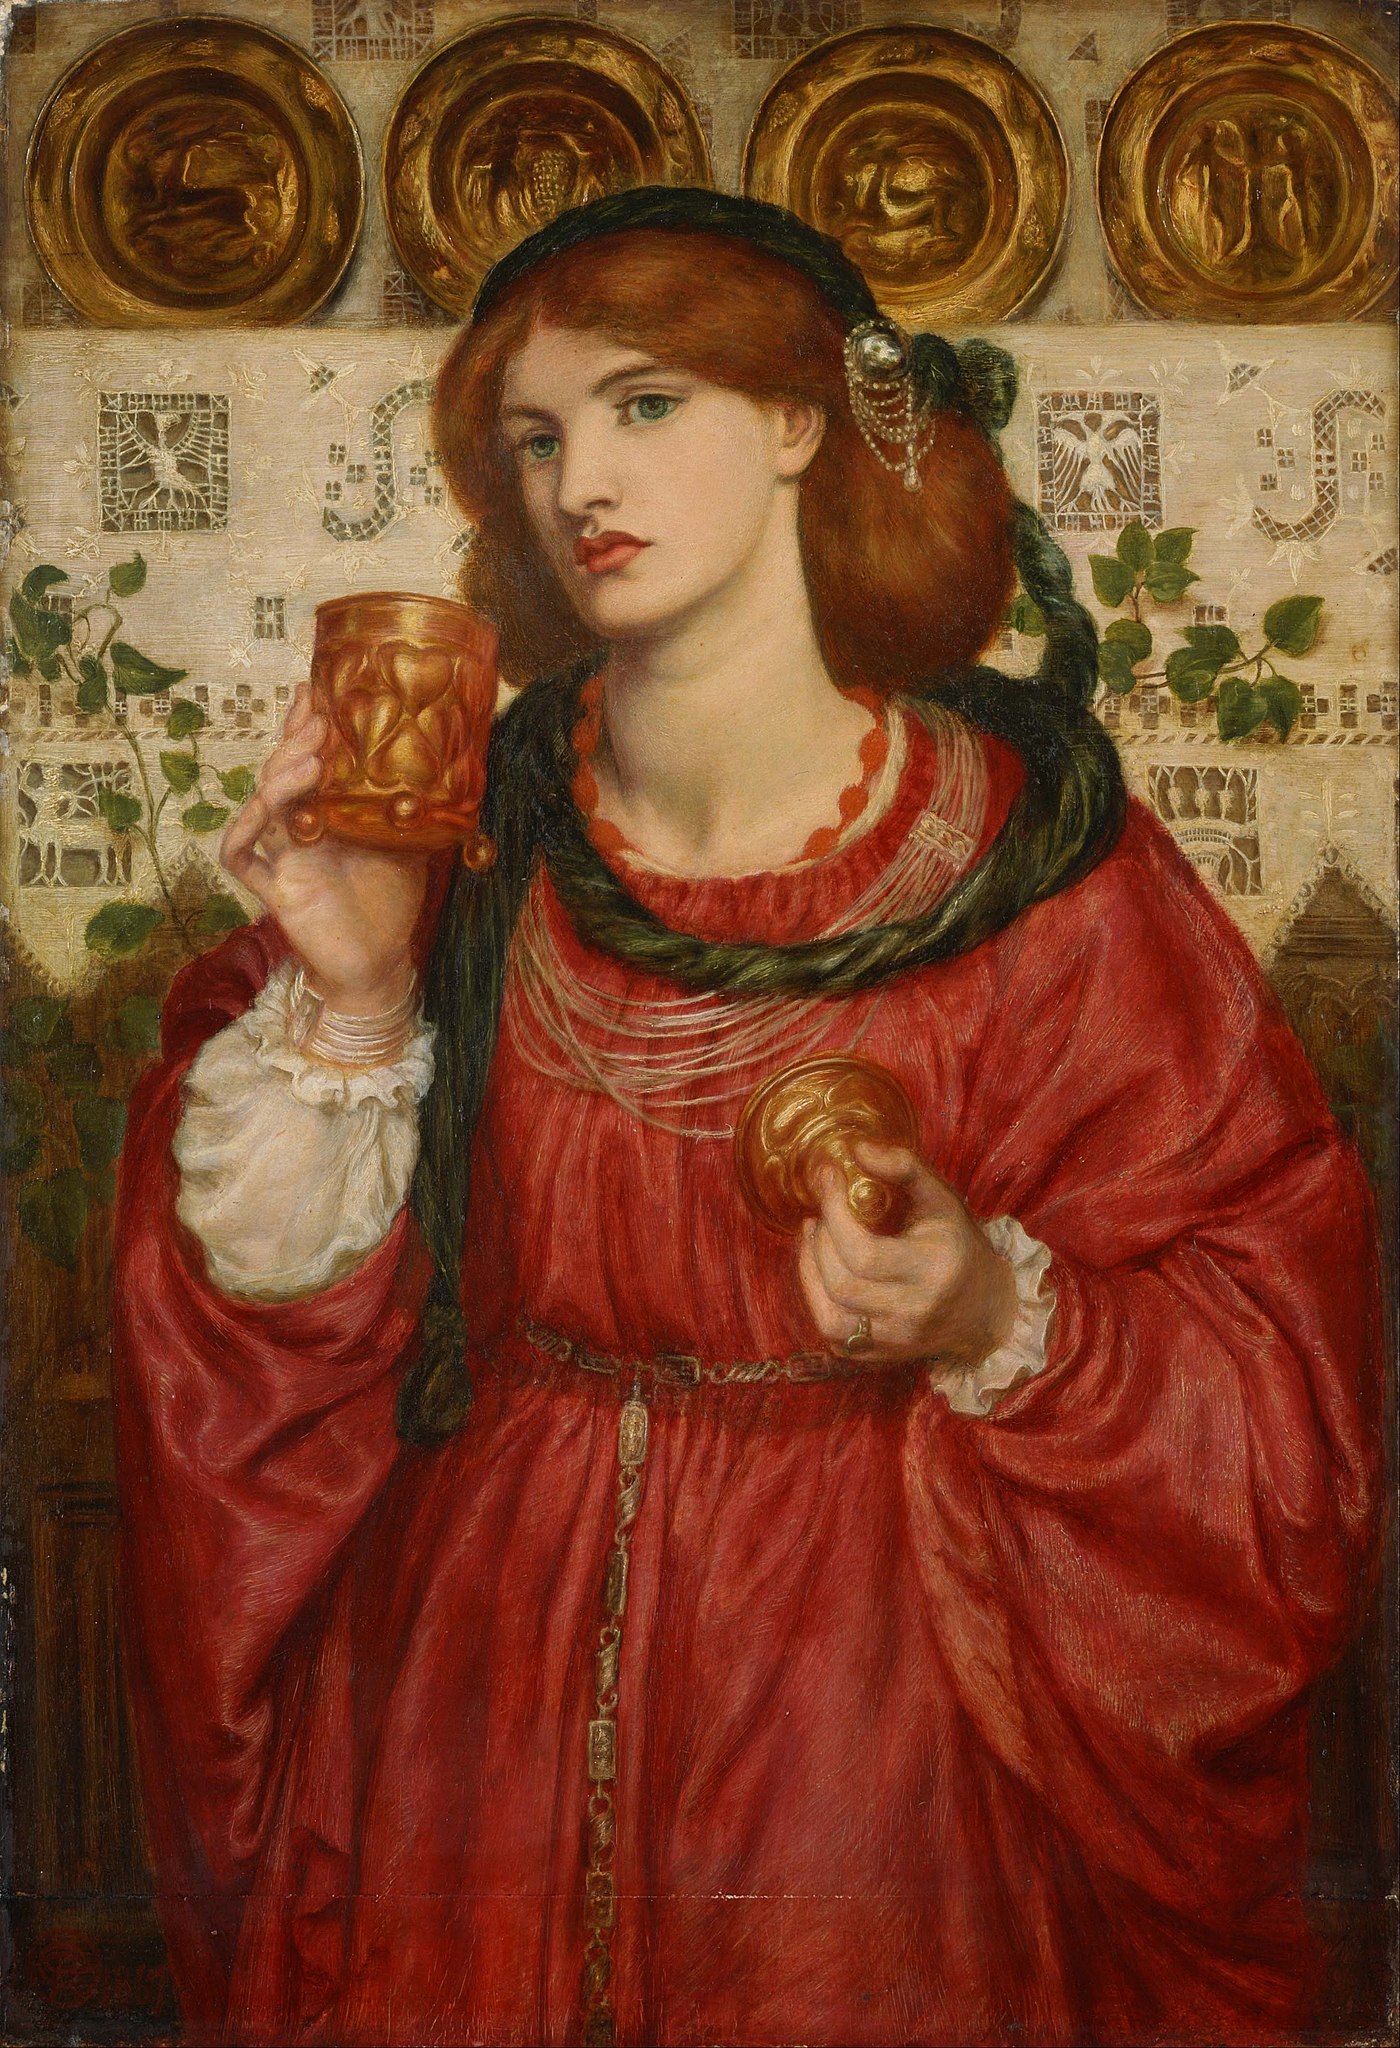 The Loving Cup by Dante Gabriel Rossetti - 1867 - 45.7 x 66 cm The National Museum of Western Art, Tokyo